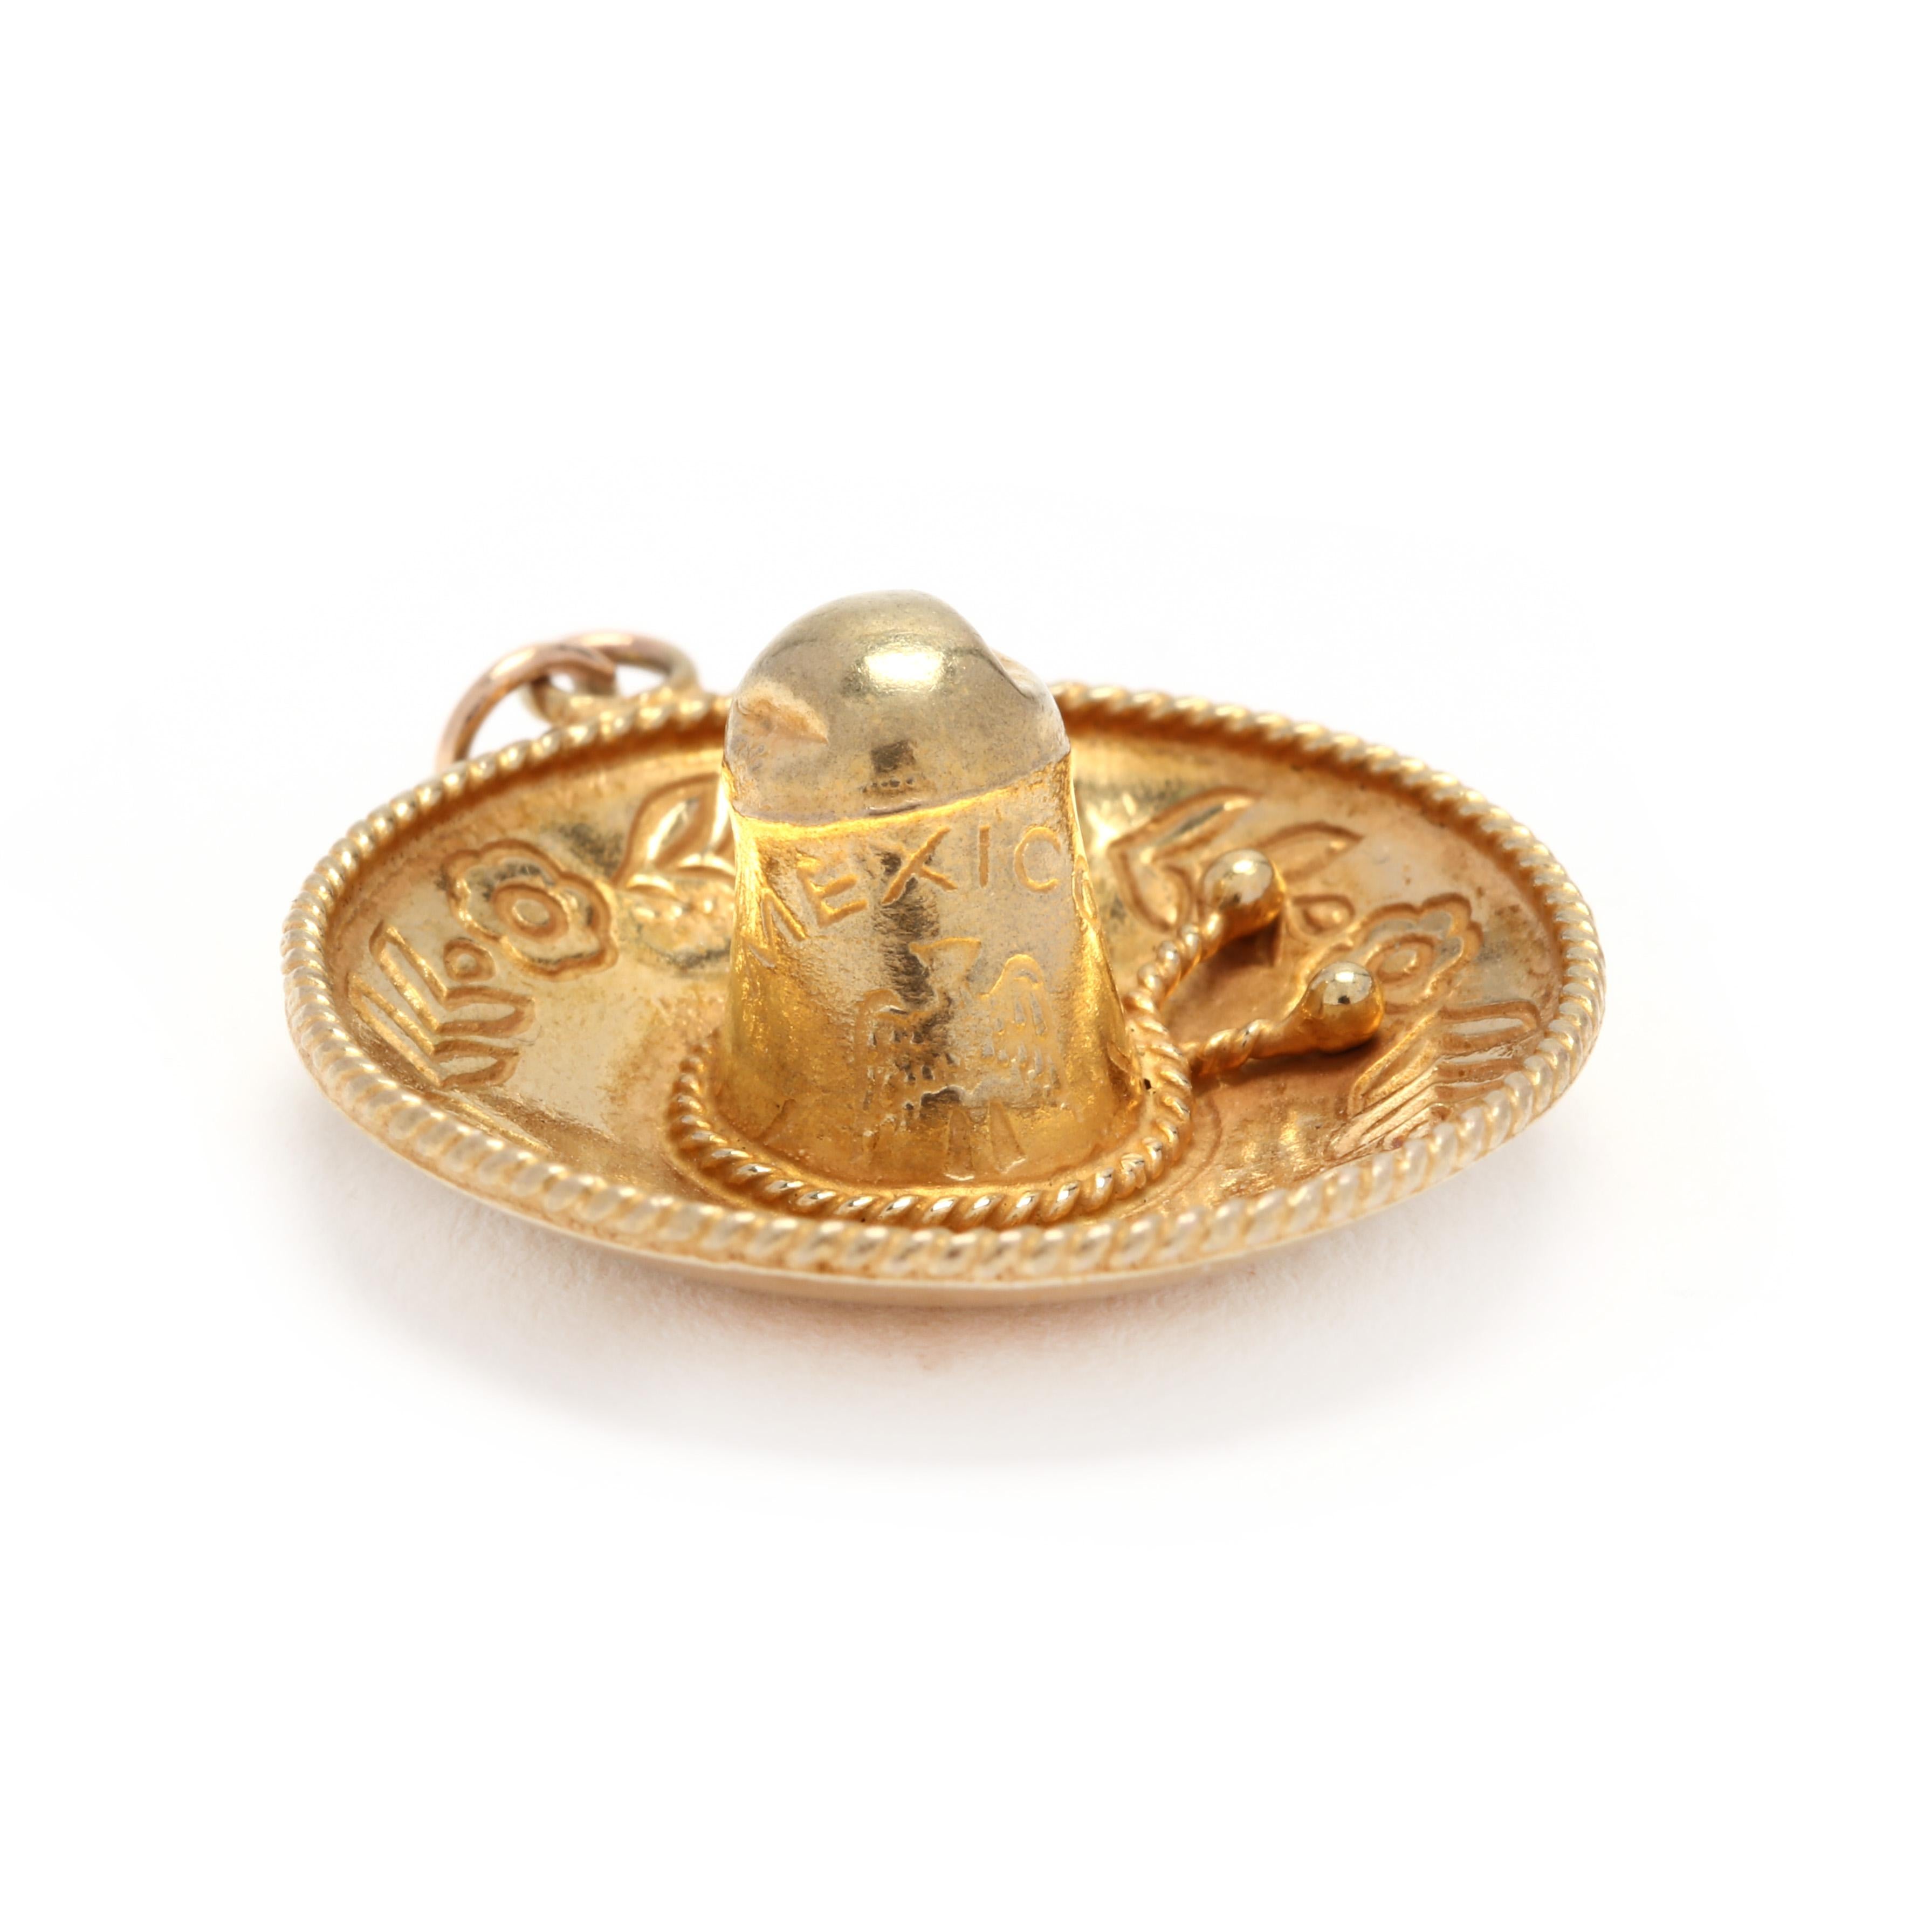 A 14 karat yellow gold sombrero charm / pendant. This charm features a sombrero hat motif with floral engraved detailing and rope motifs.

Length: 1.25 in.

Width: 7/8 in.

2.16 dwts.

* Please note that this is a vintage item and may show signs of